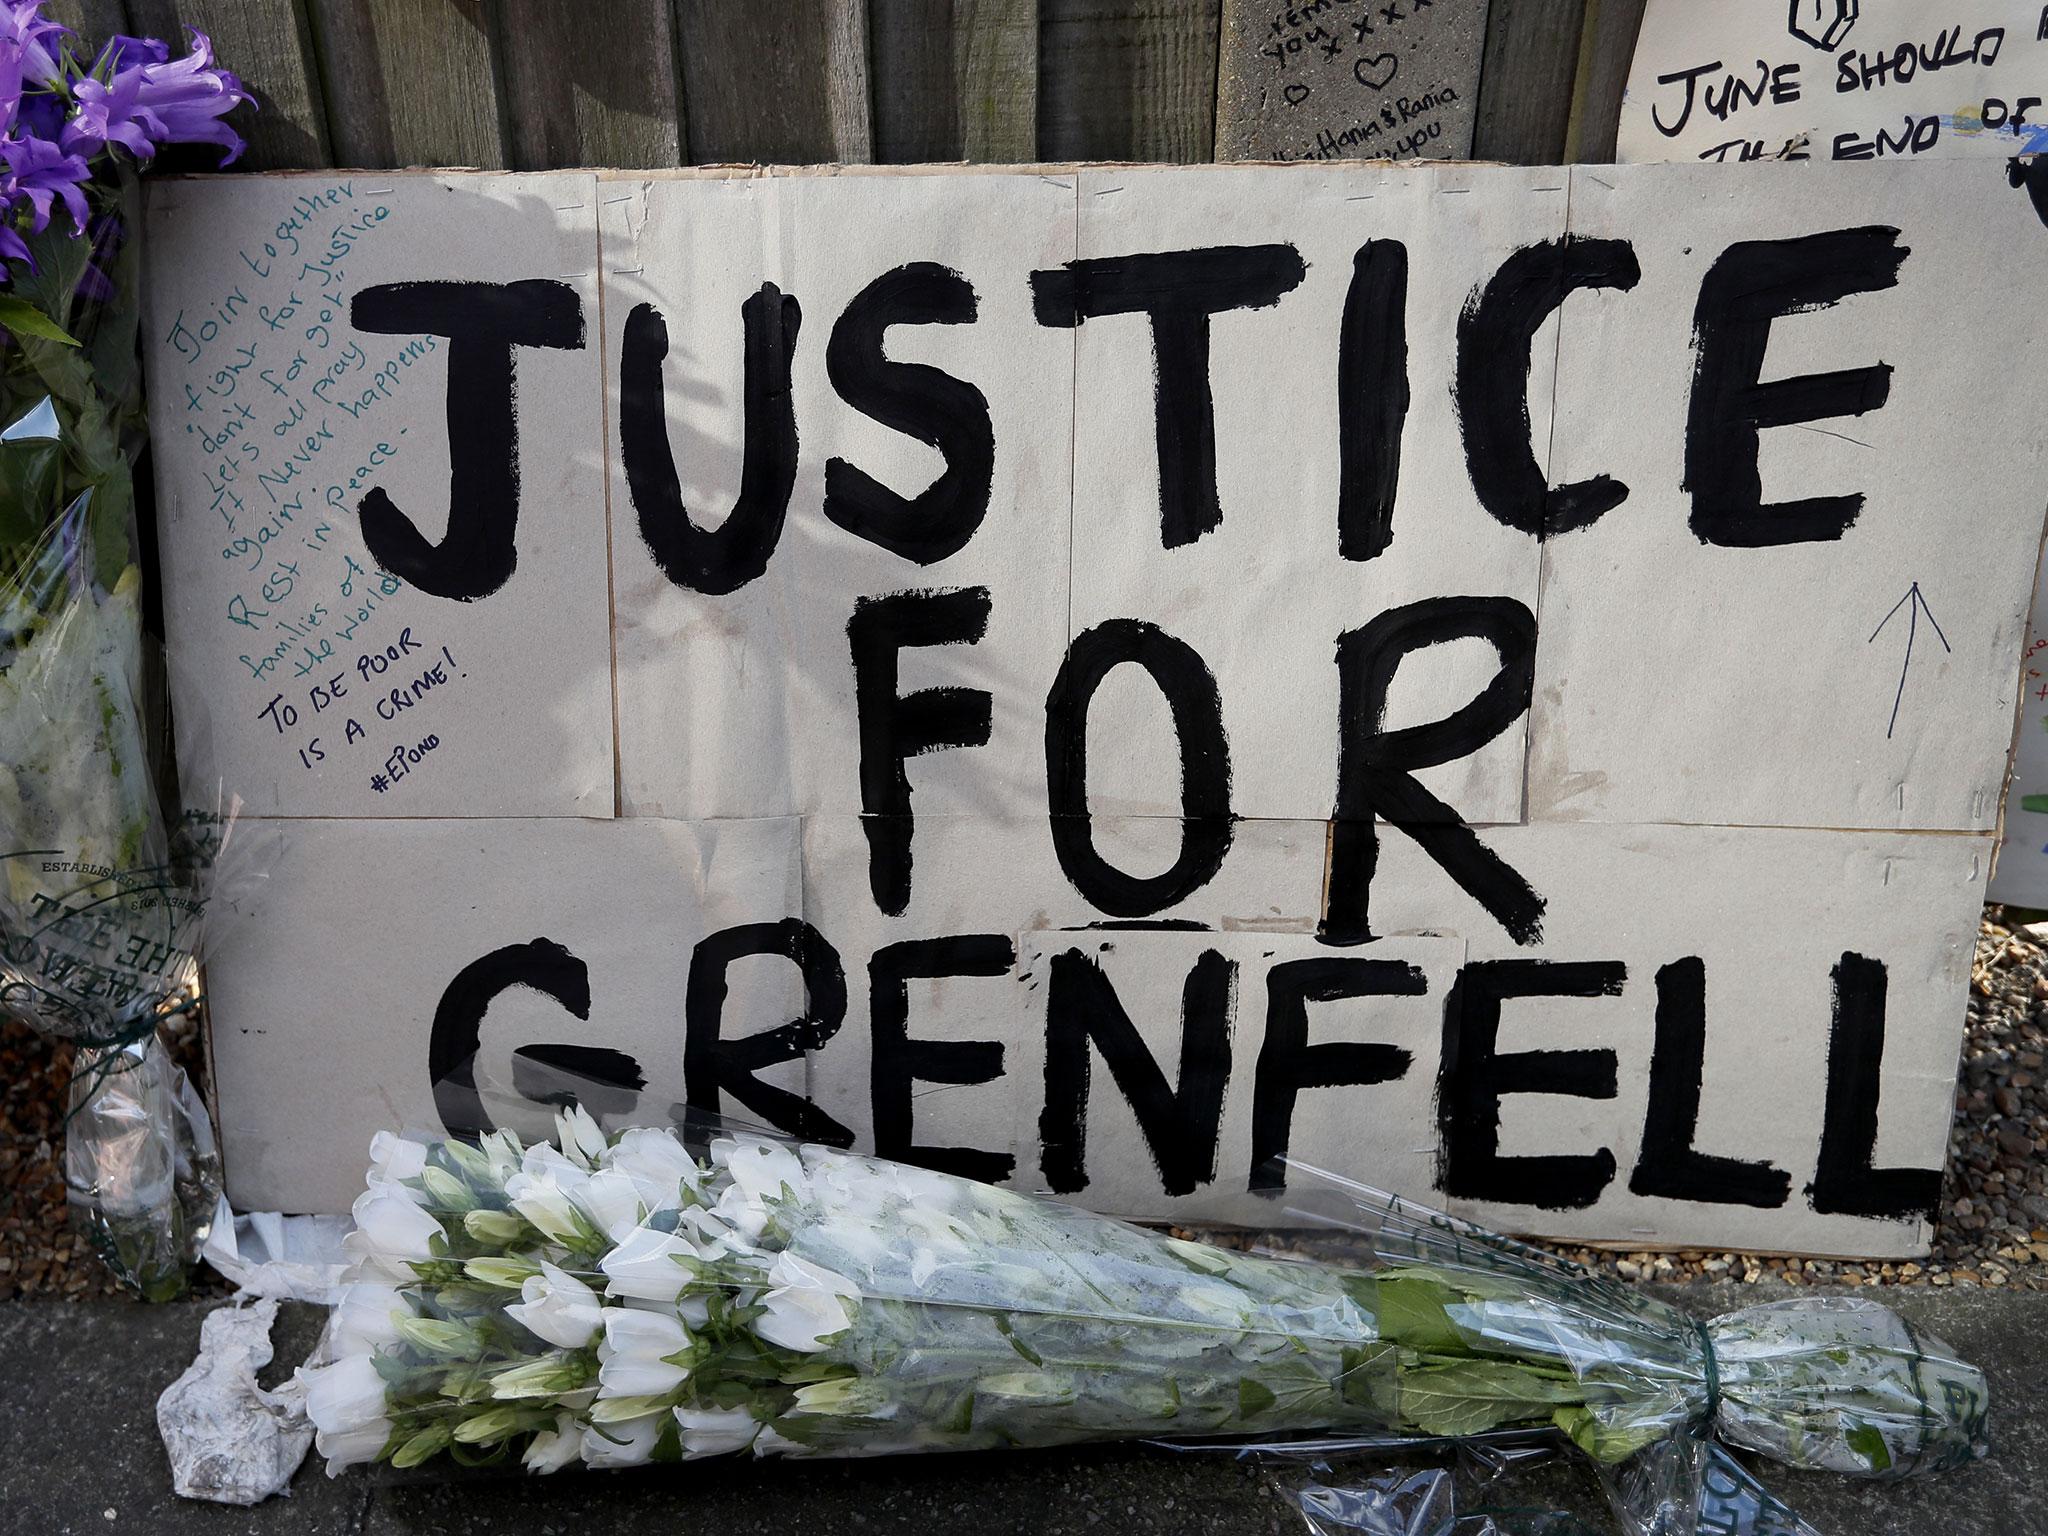 At least 58 people died, or are missing, presumed dead, in the Grenfell Tower tragedy